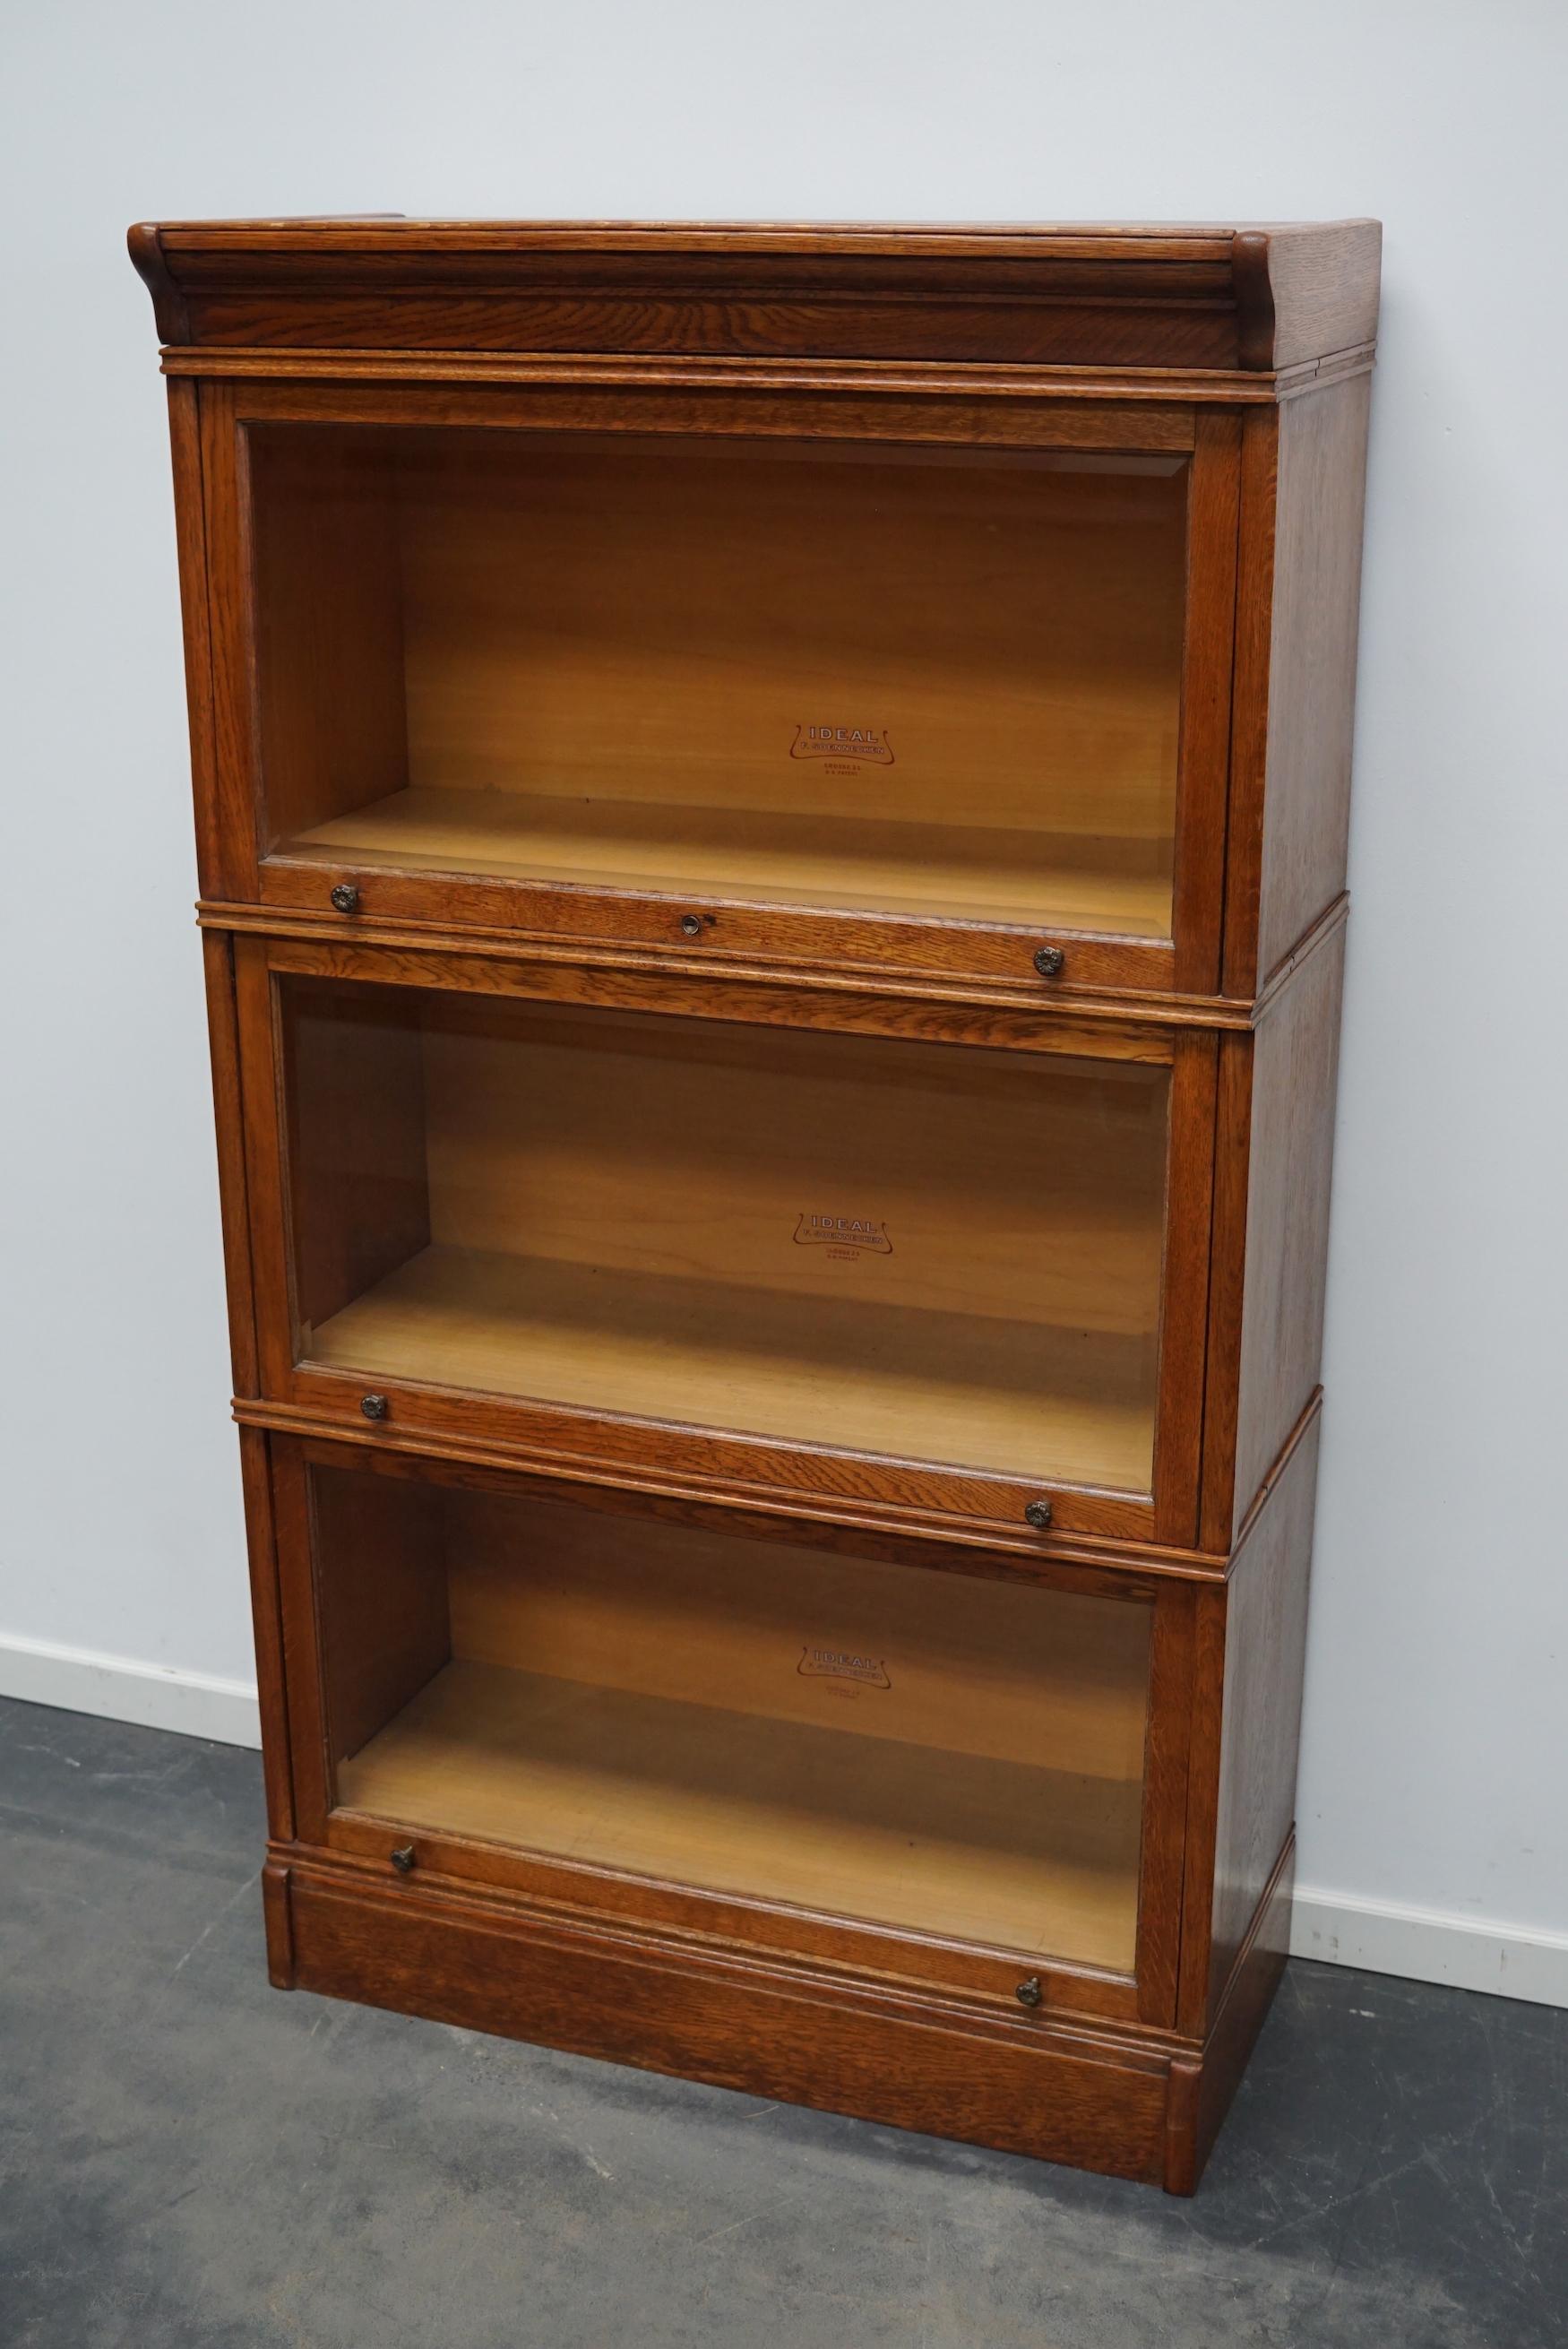 This bookcase was produced by F.Soennecken in the Germany around 1900. It features 3 stackable large compartments with cut glass sliding doors. The interior dimensions of the compartments are: DWH 30 x 82 x 36 cm.